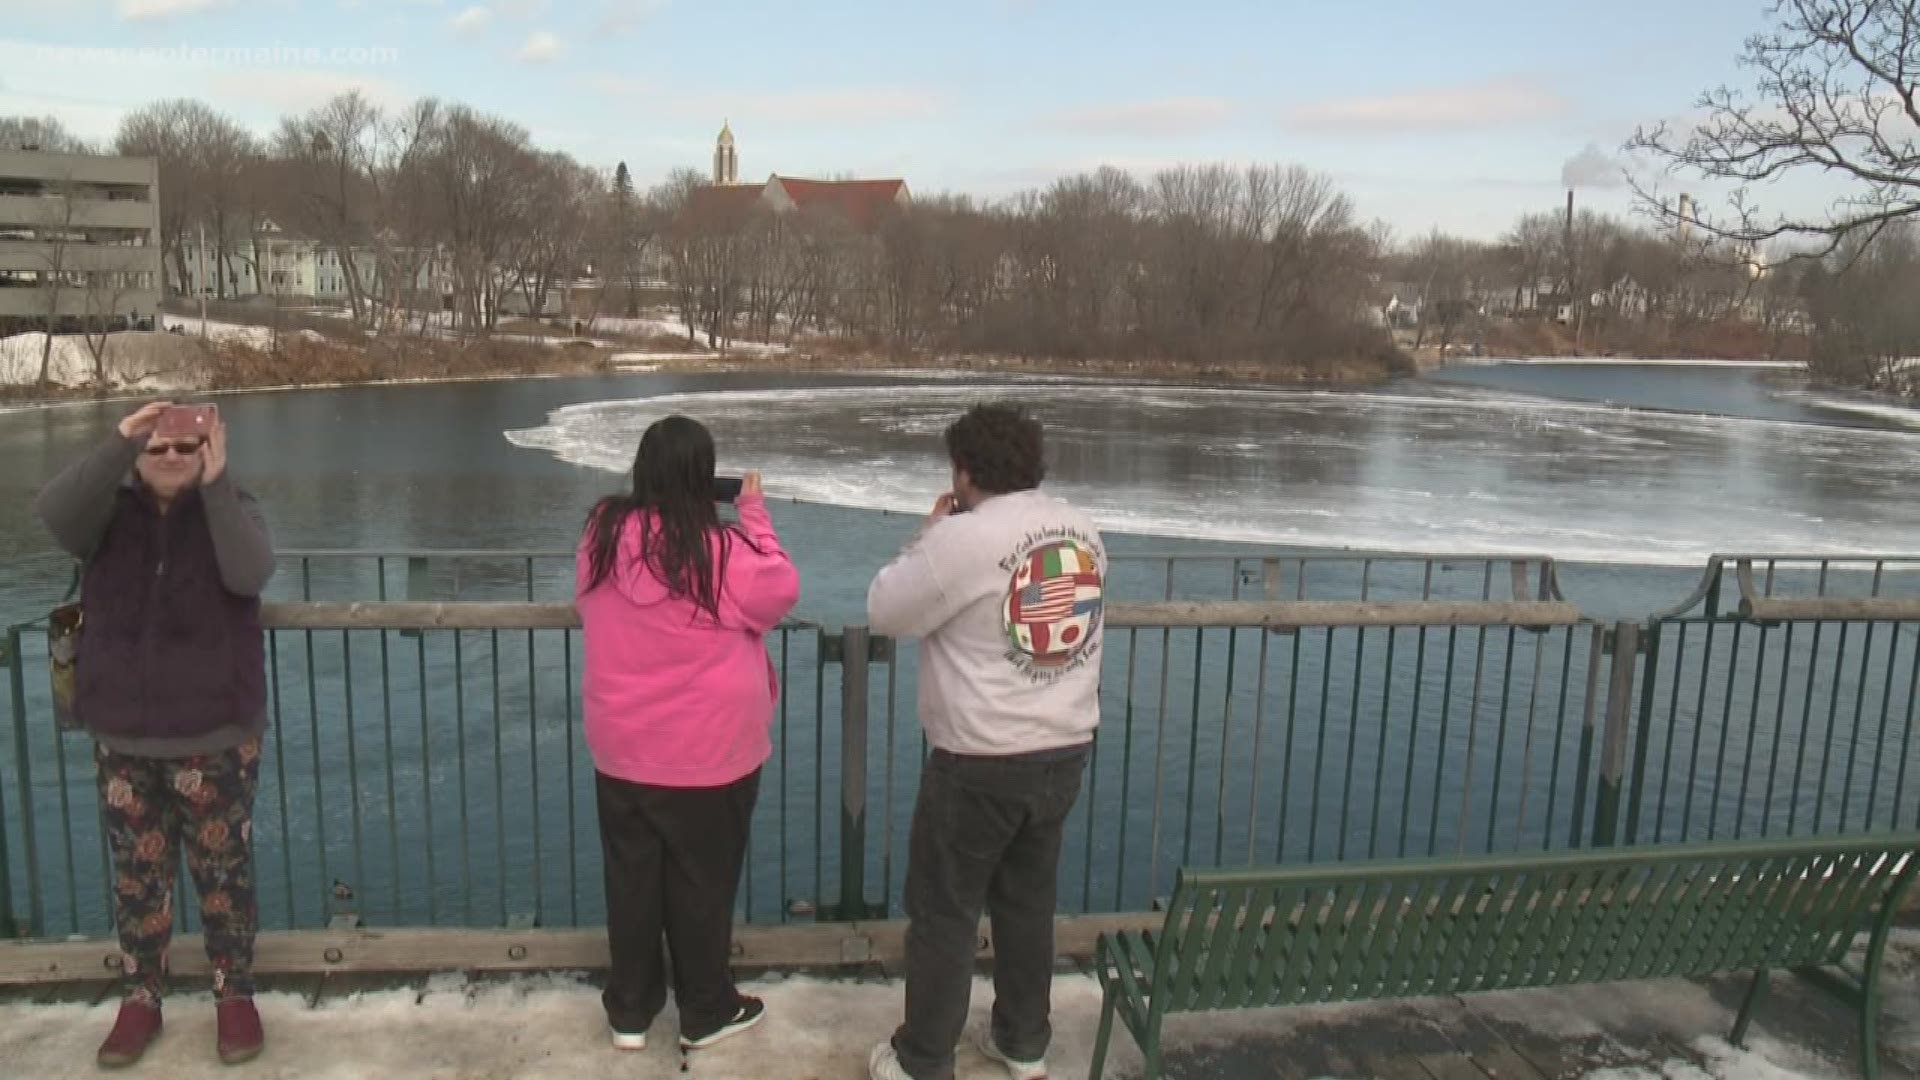 The ice disk in Presumpscot River in Westbrook attracts attention from around the world